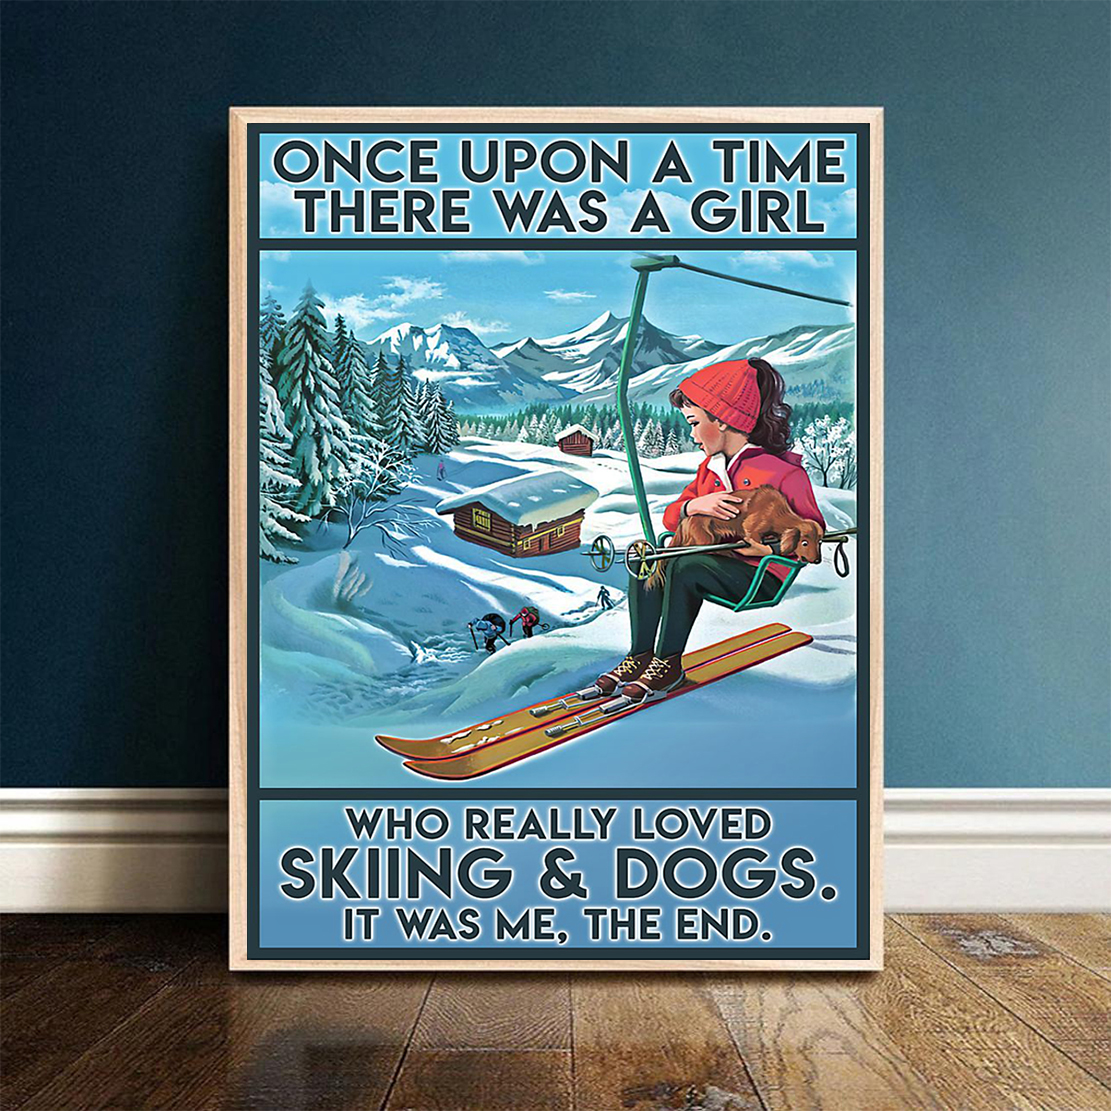 Once upon a time there was a girl who really loved skiing and dogs poster